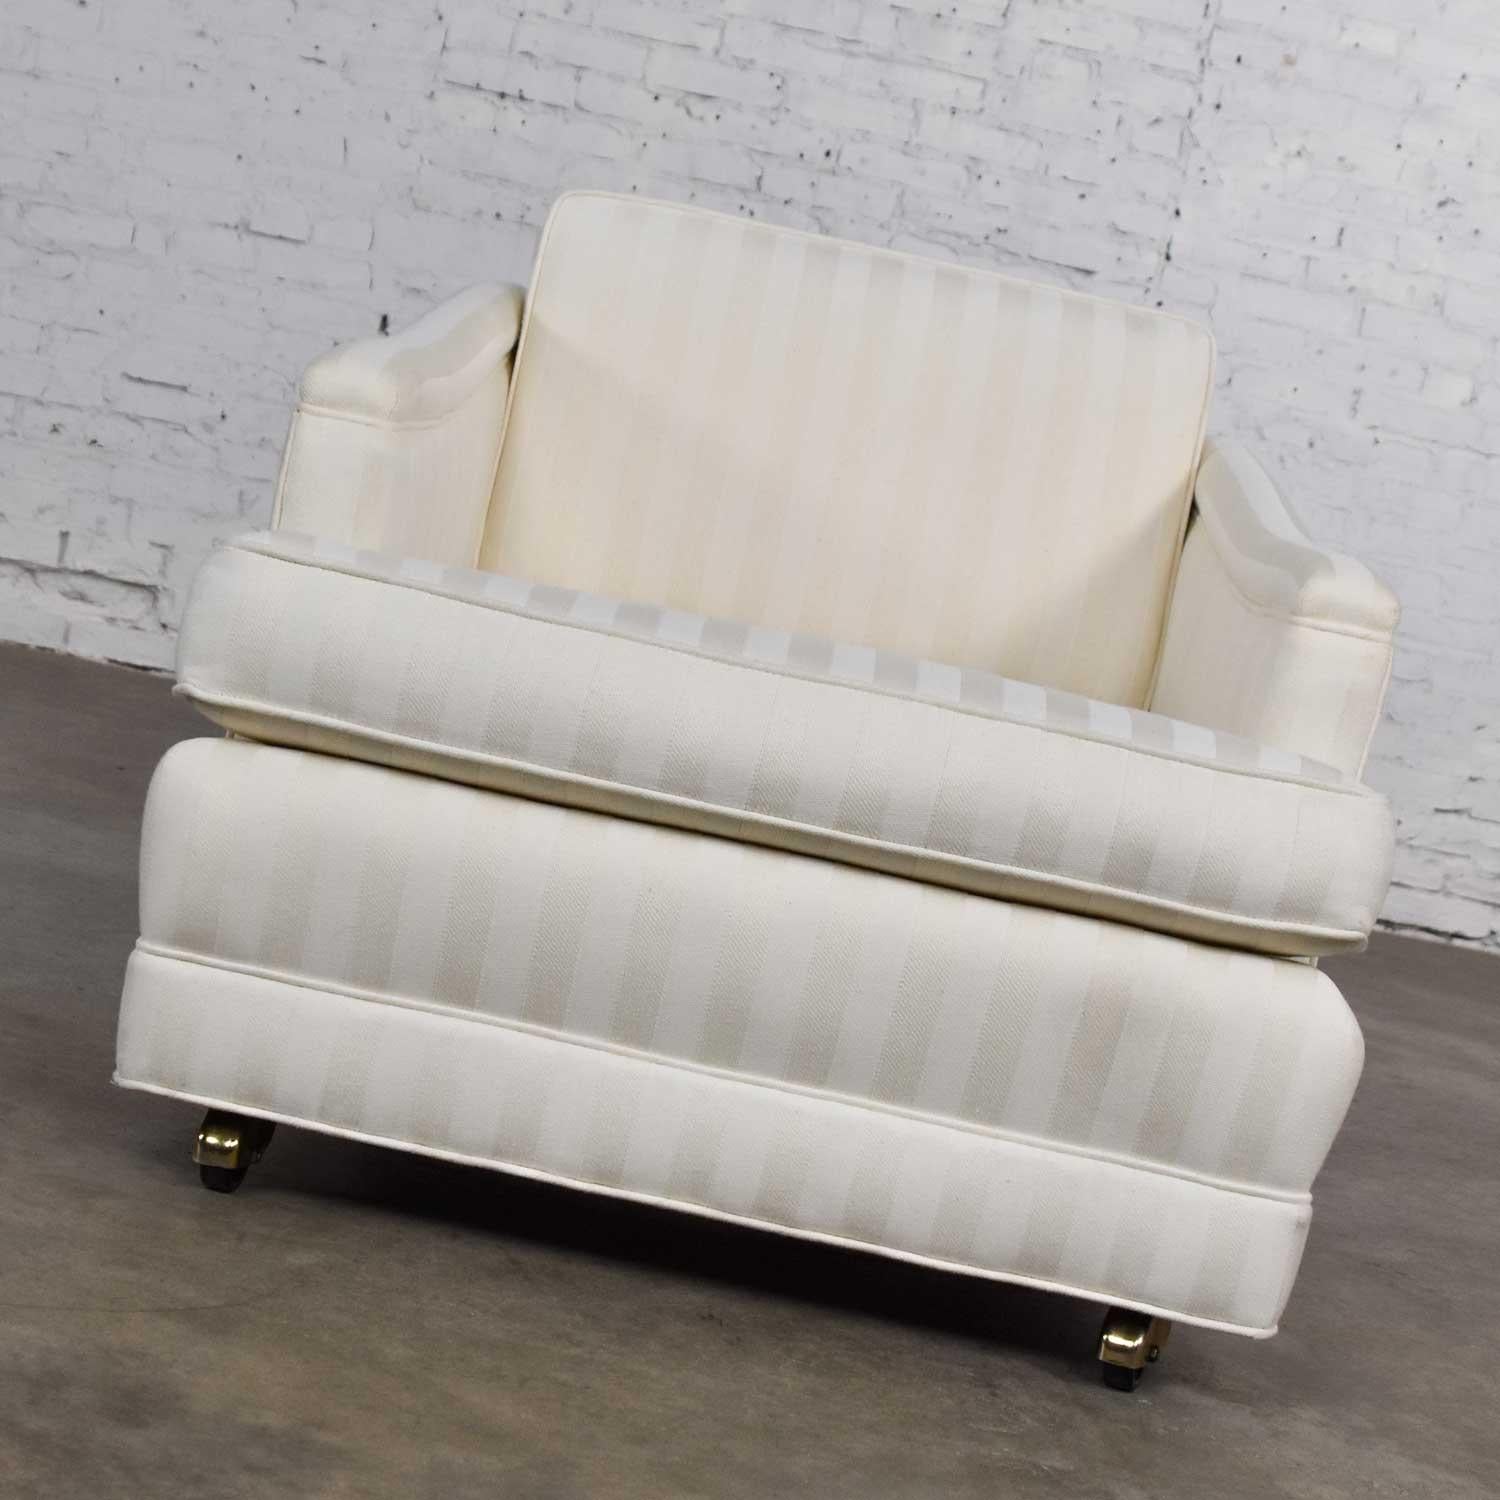 Mid-Century Modern Off White Tone on Tone Stripe Lounge Chair on Rolling Casters In Good Condition For Sale In Topeka, KS